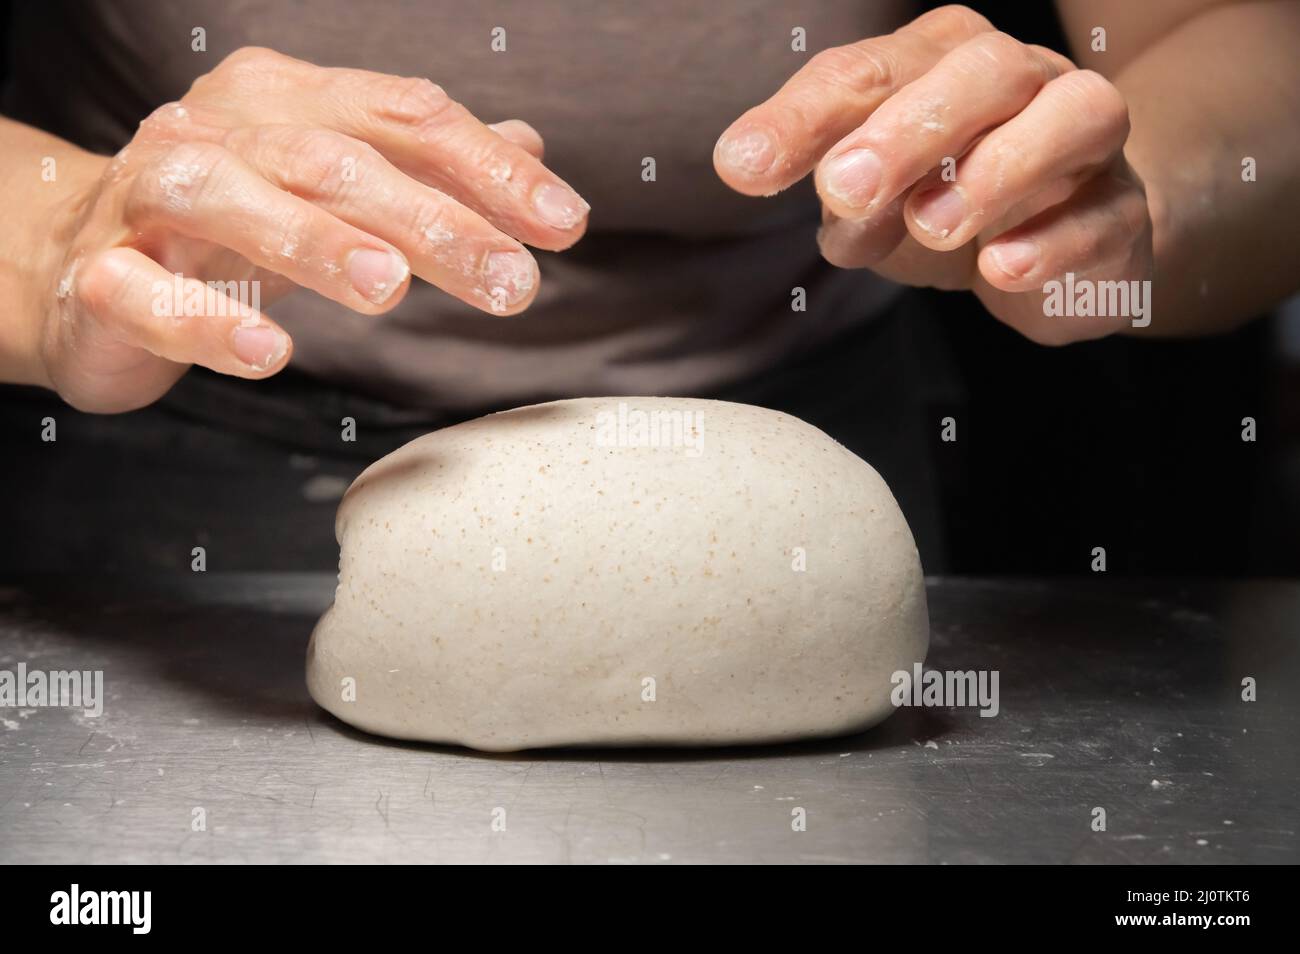 Close-up of female hands kneading dough for making artisan bread at home bakery Stock Photo